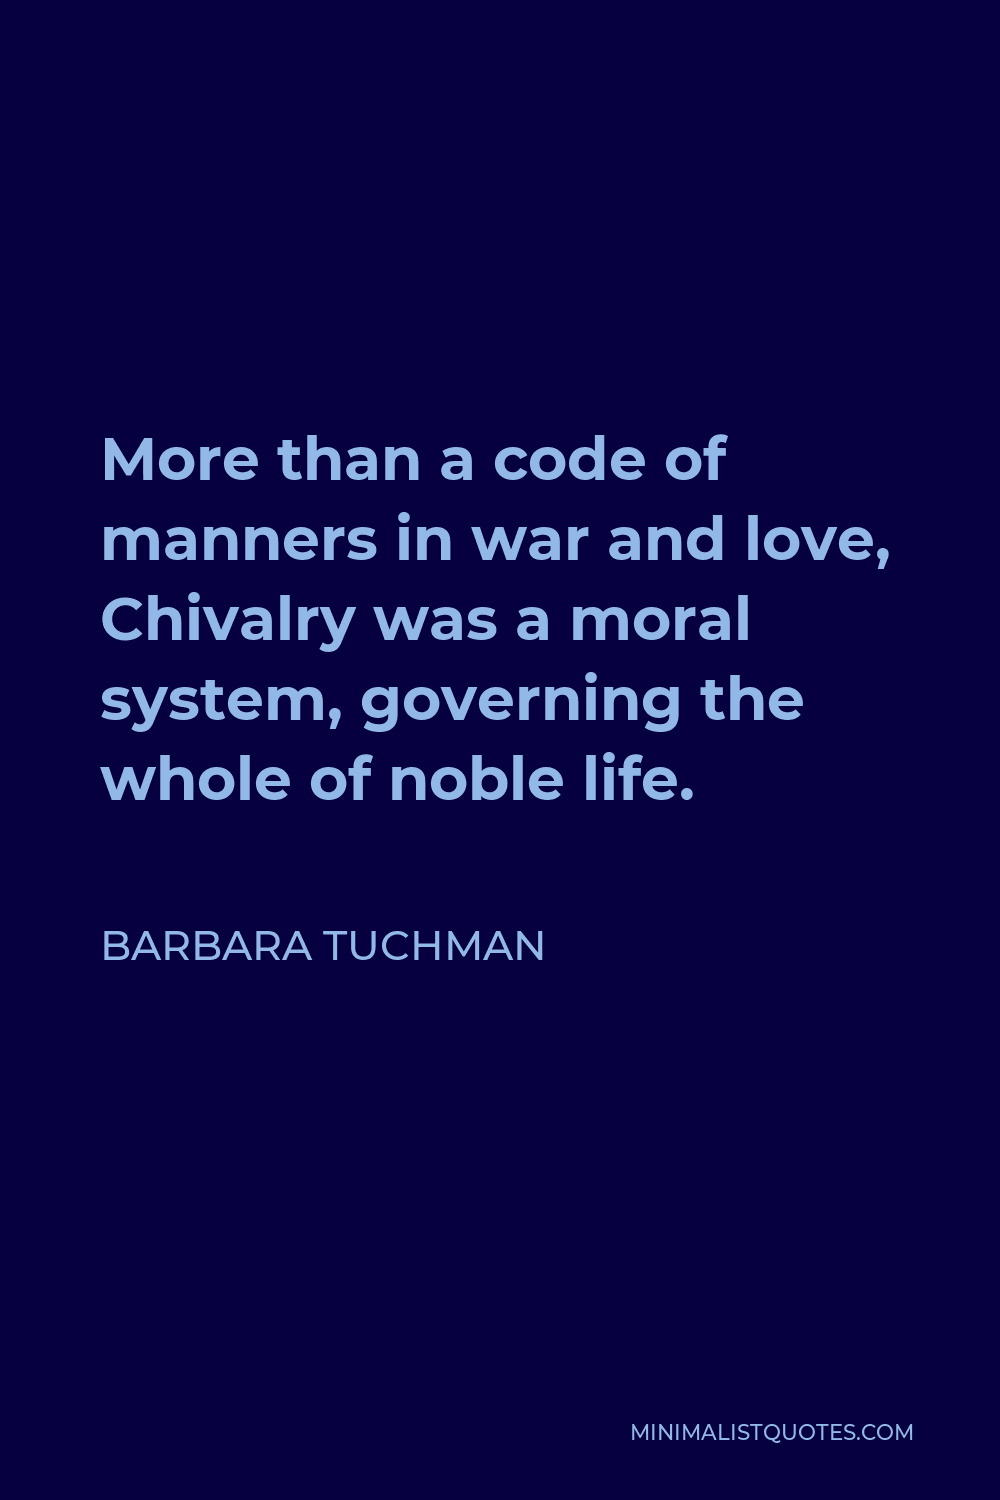 Barbara Tuchman Quote - More than a code of manners in war and love, Chivalry was a moral system, governing the whole of noble life.